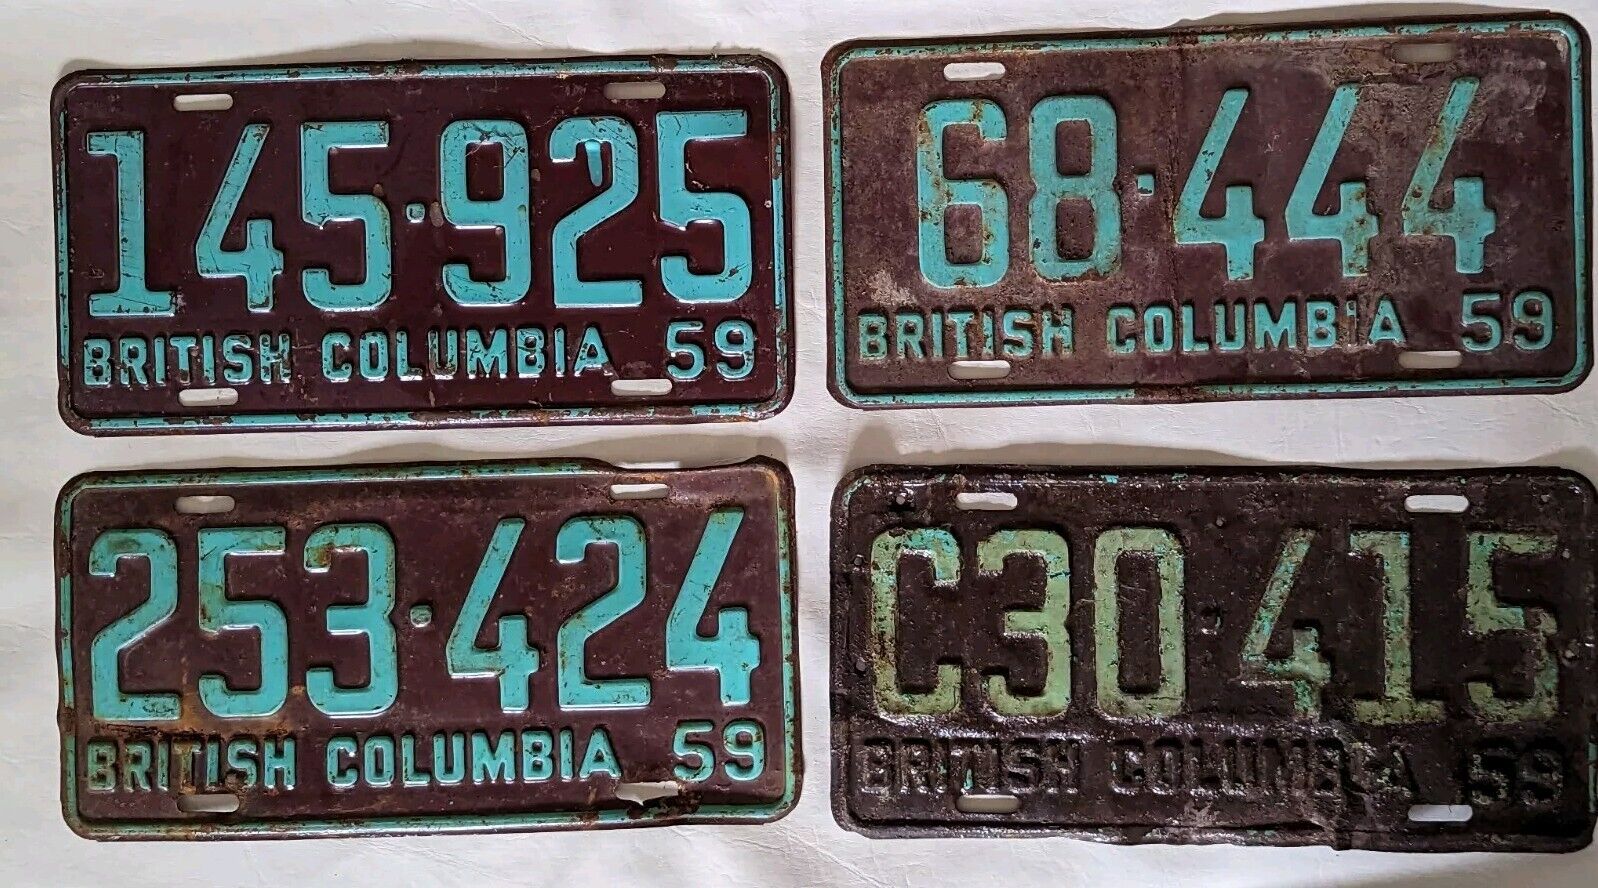 Vintage 1959 British Columbia License Plate Lot Of 4 - Shows Heavy Wear